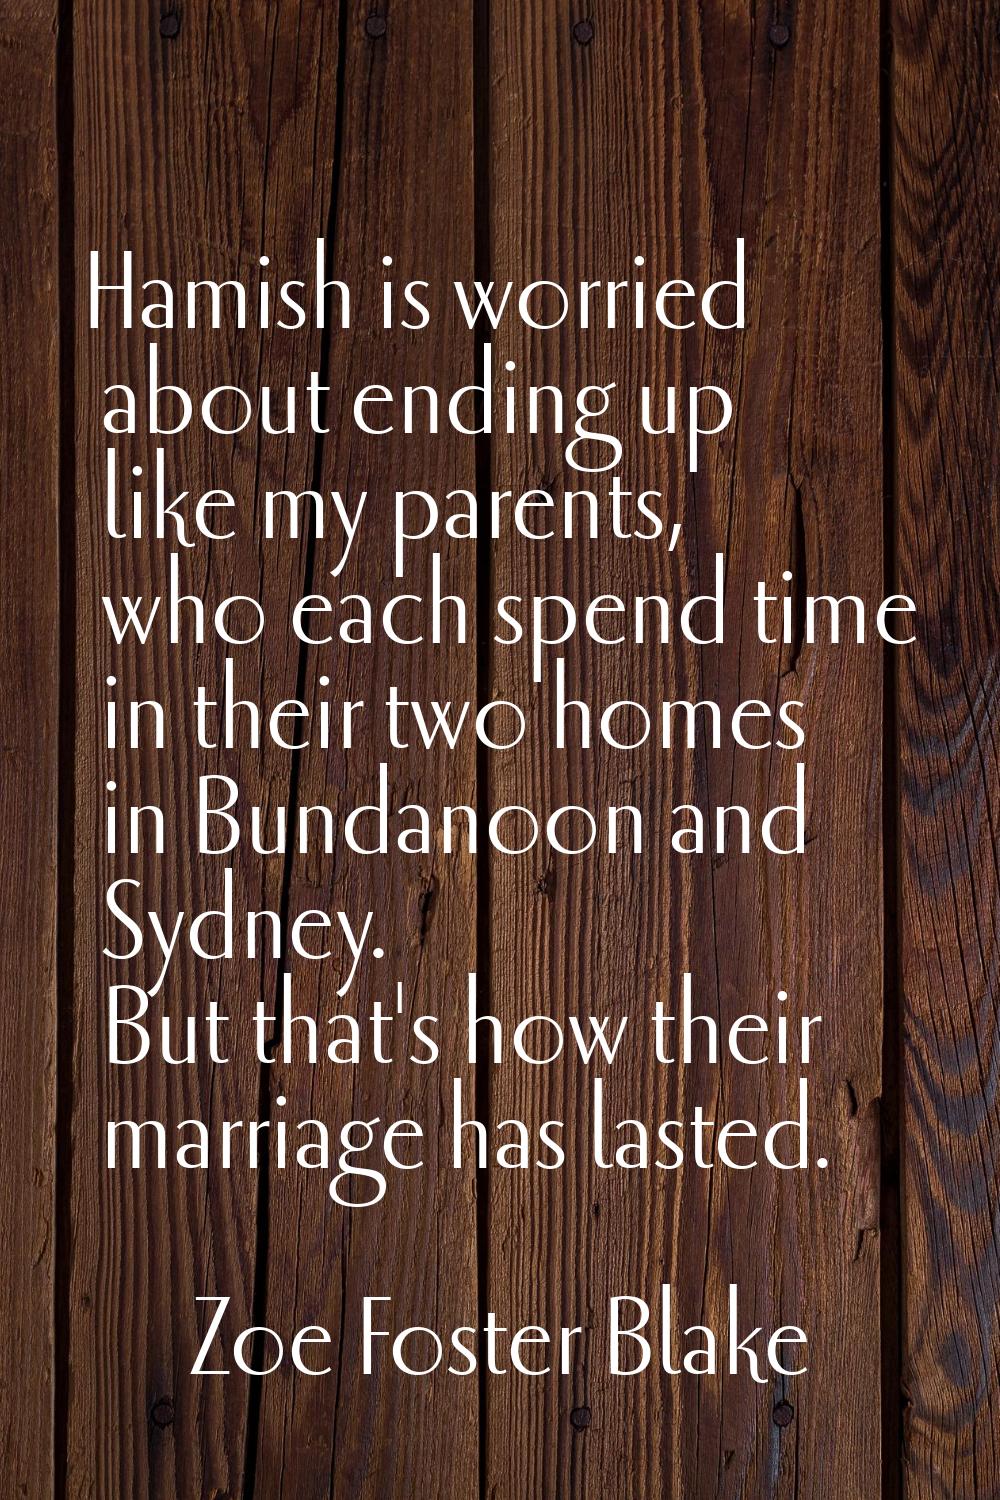 Hamish is worried about ending up like my parents, who each spend time in their two homes in Bundan